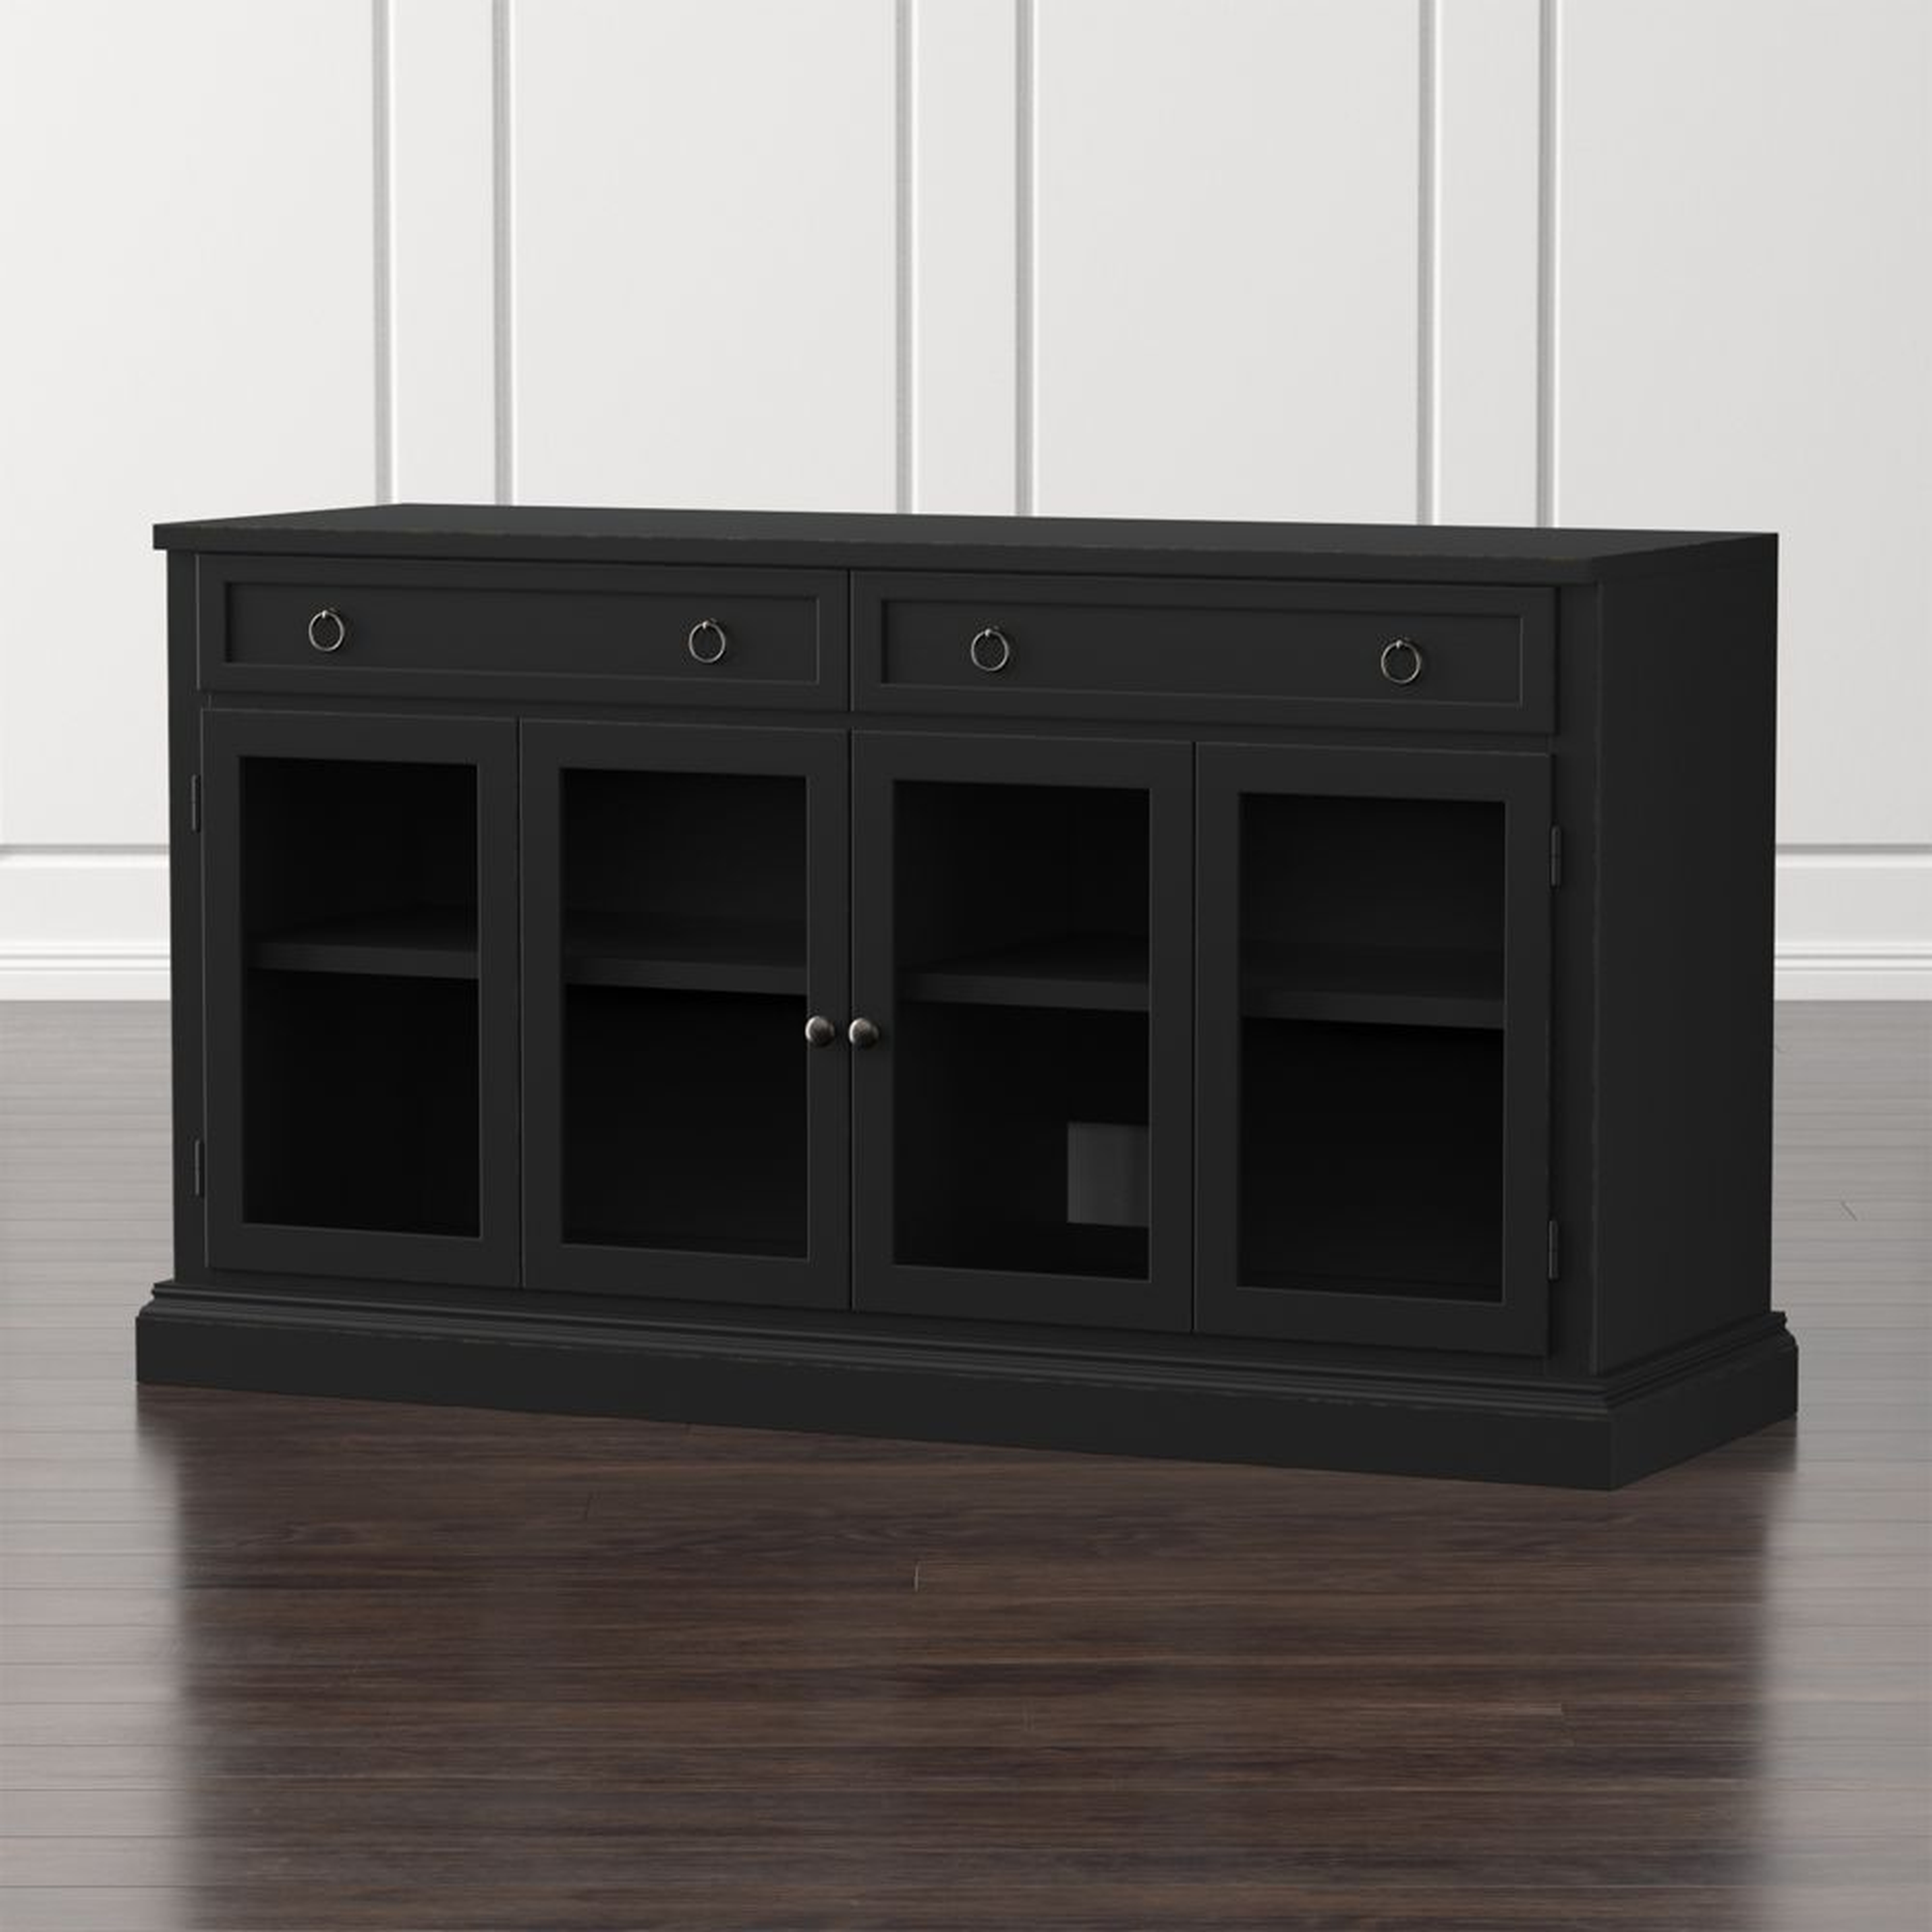 Cameo 62" Bruno Black Modular Media Console with Glass Doors - Crate and Barrel